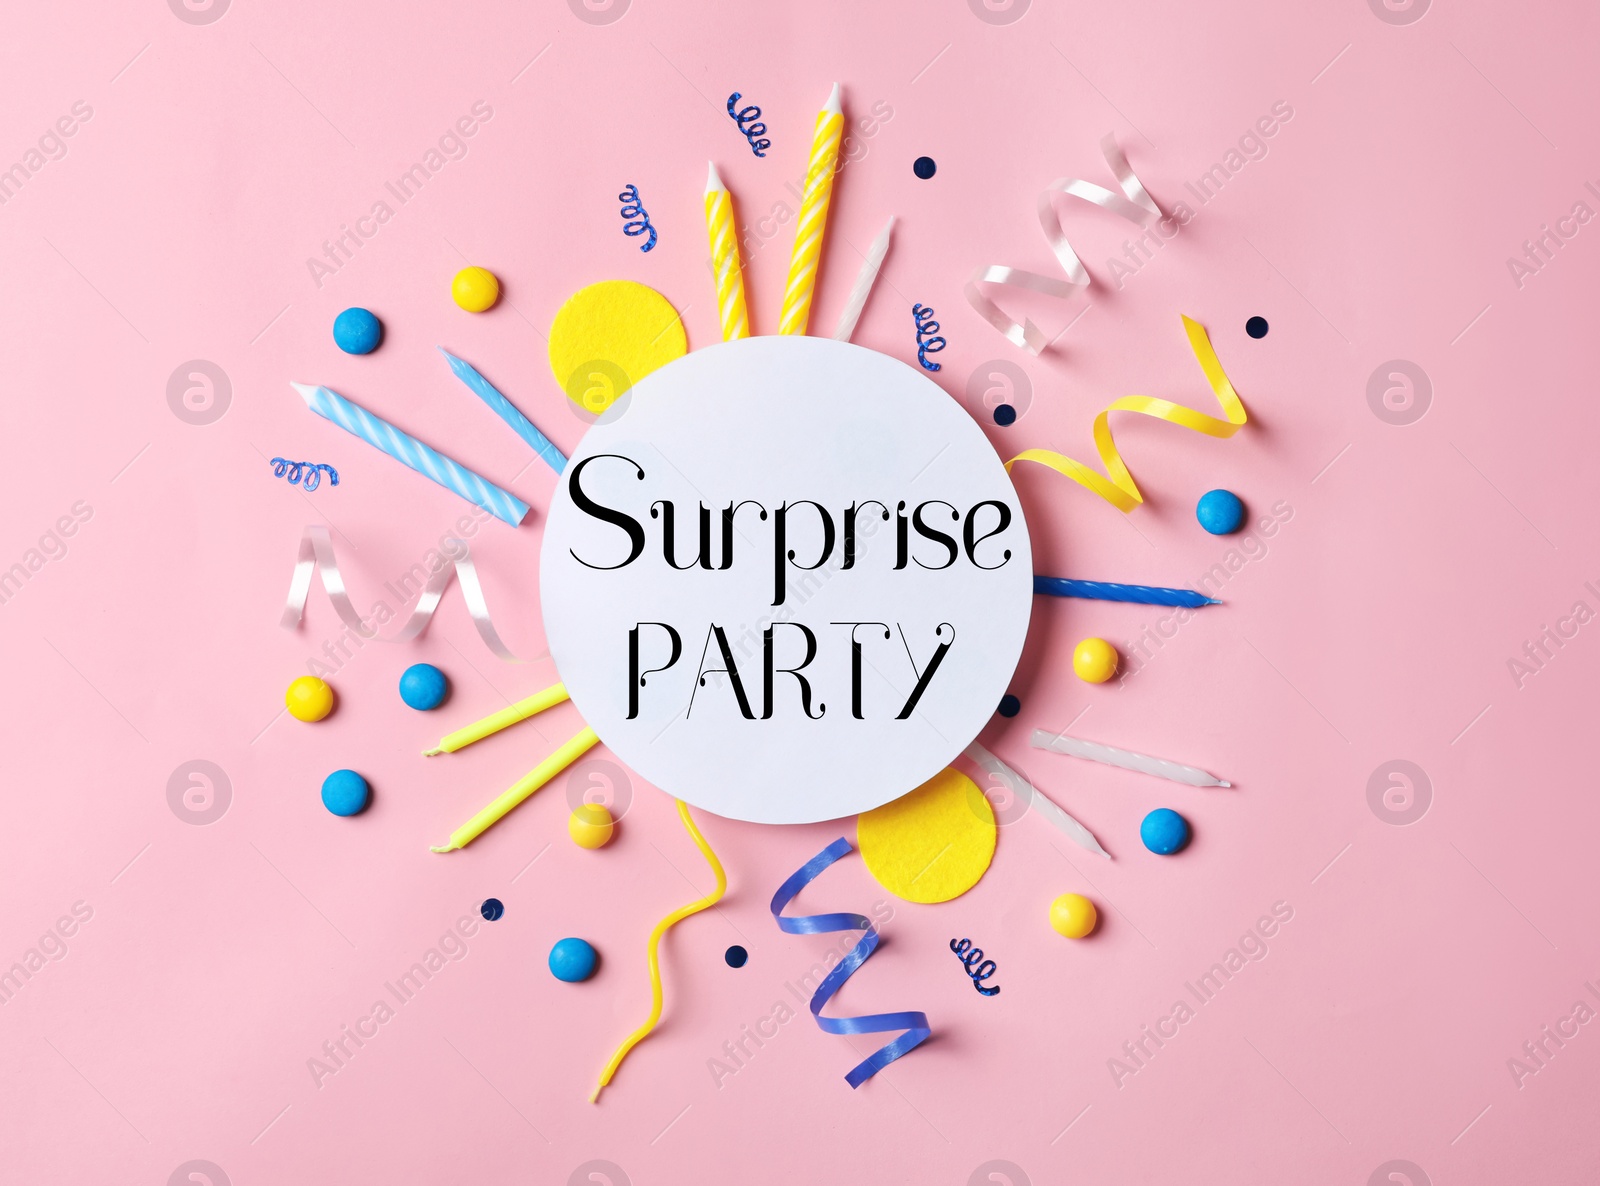 Image of Flat lay composition with different items for surprise party on pink background